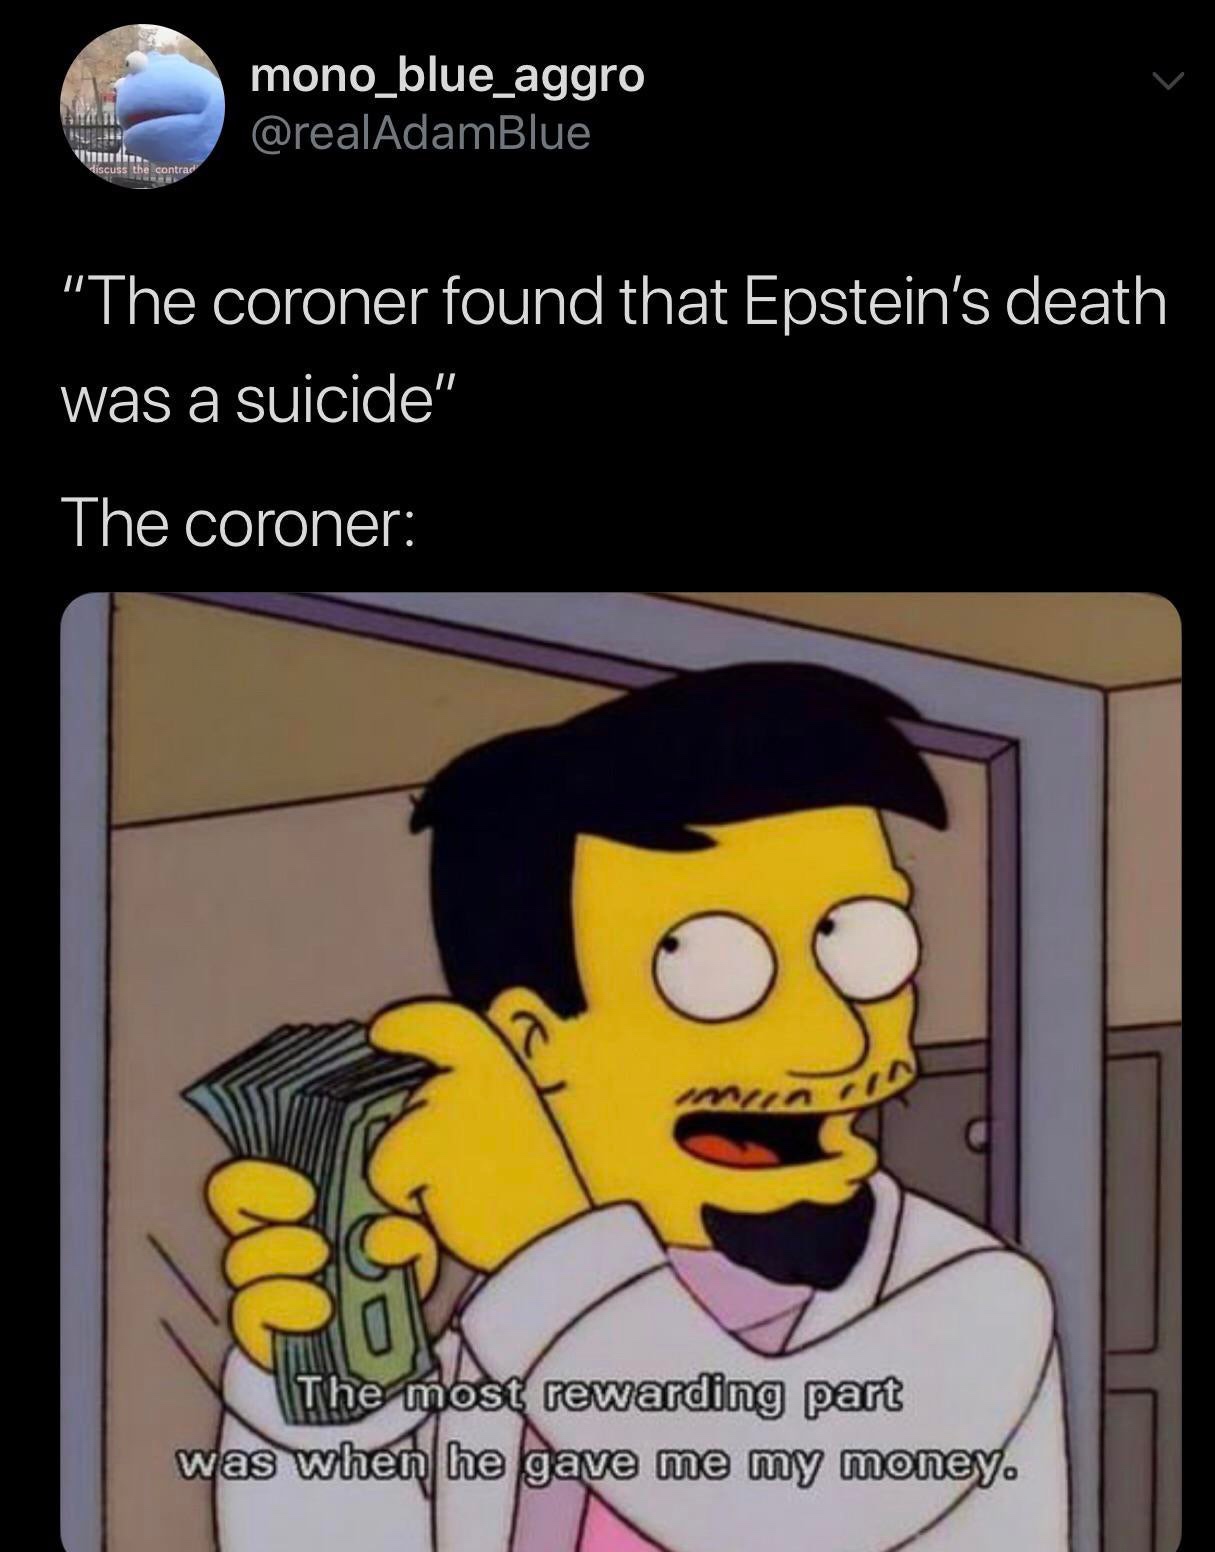 best simpsons quotes - mono_blue_aggro Titille discuss the contrad I "The coroner found that Epstein's death was a suicide" The coroner The most rewarding part was when he gave me my money.